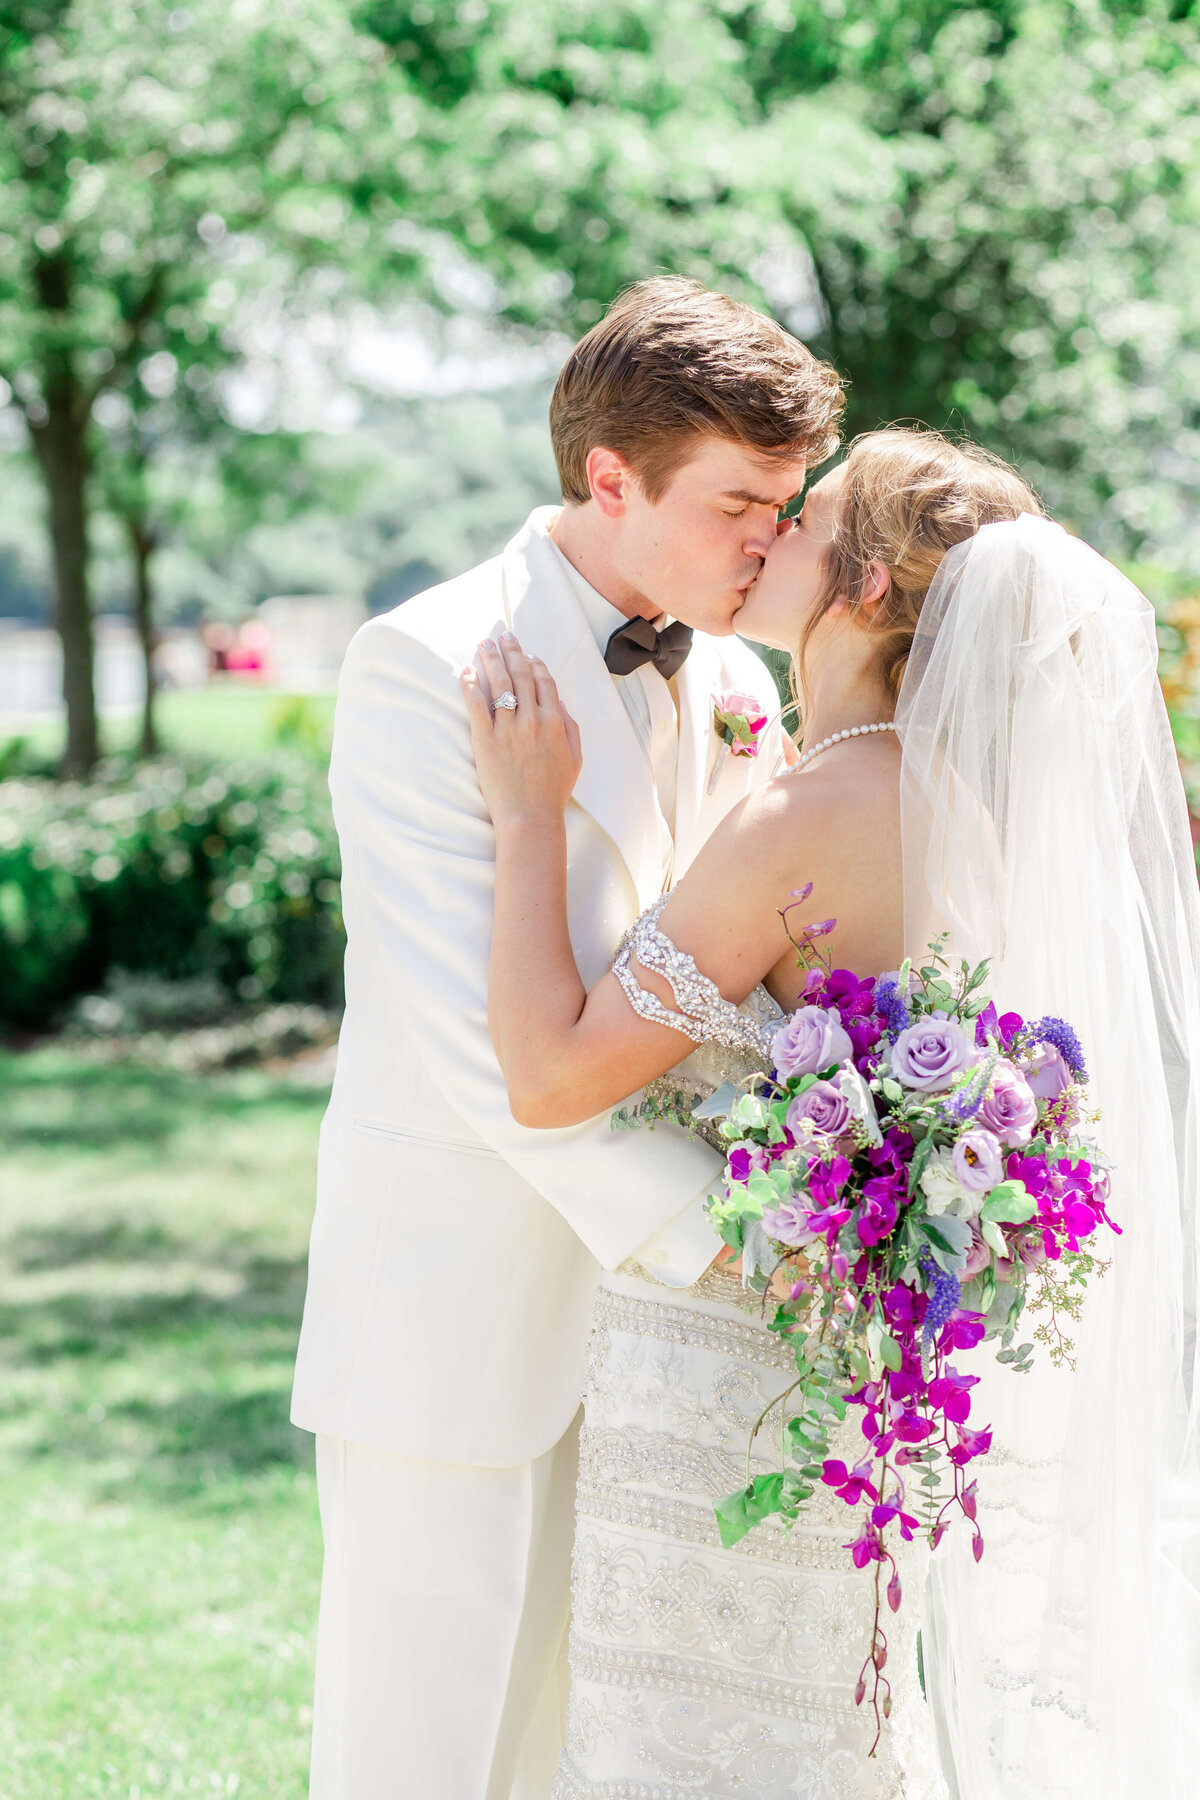 Outdoor-Light-and-airy-wedding-photos-in-Tristate-Ohio-Indiana-Kentucky-1